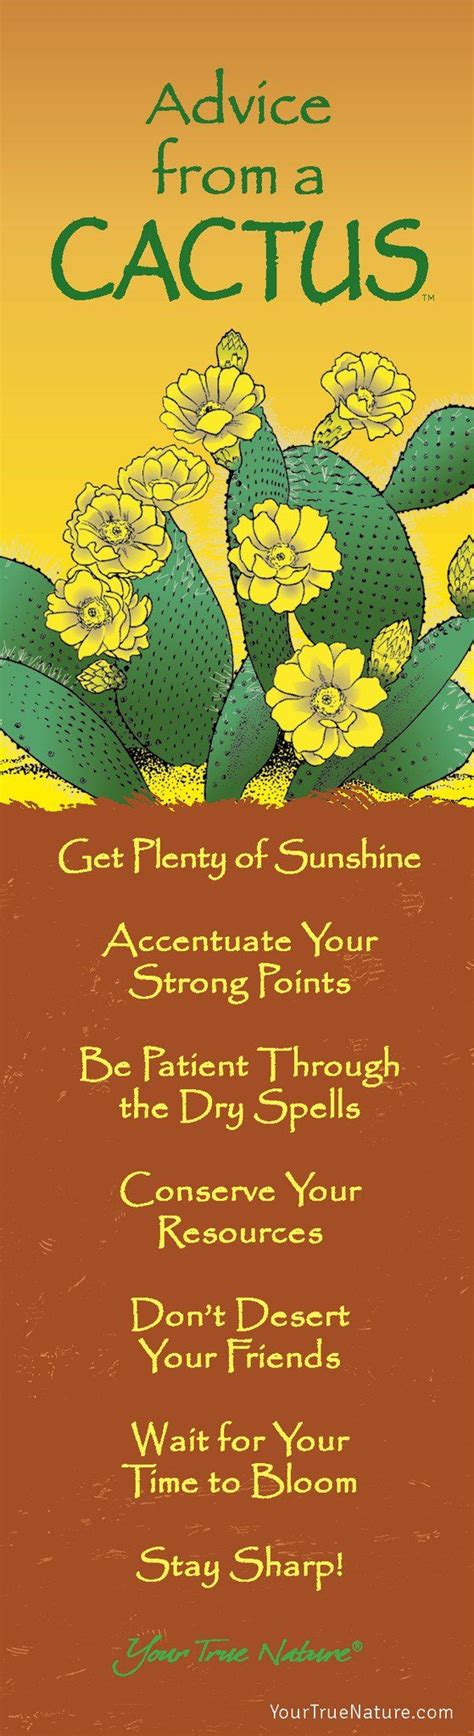 Advice From A Cactus Frameable Art Postcard Your True Nature Inc